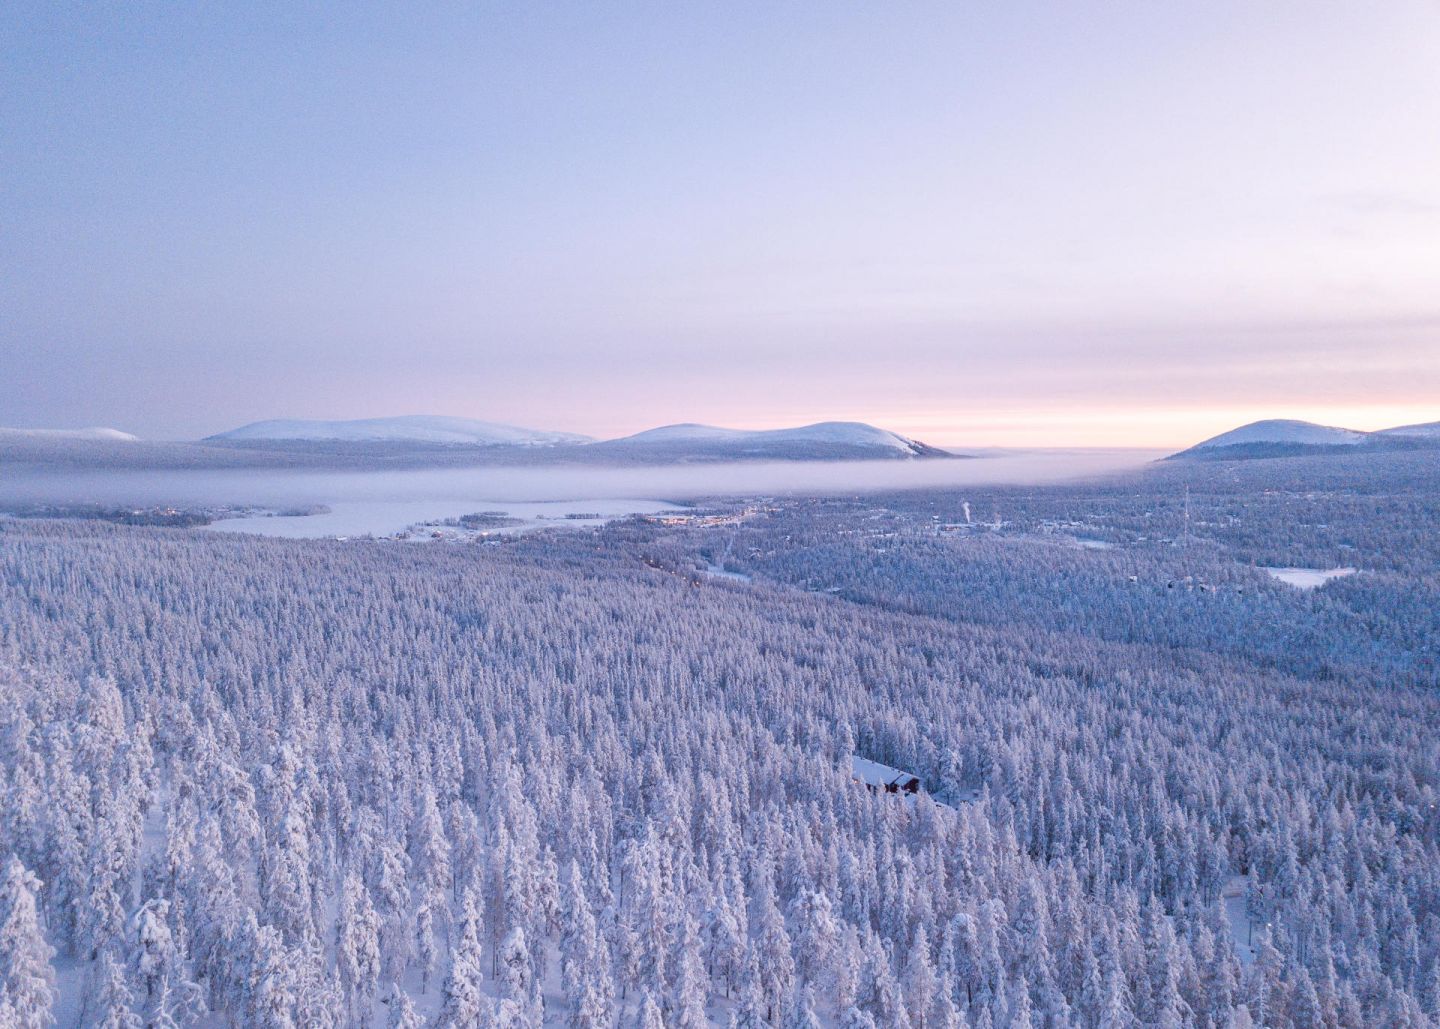 Polar night over the snowy forest in Akaslompolo, Lapland in winter